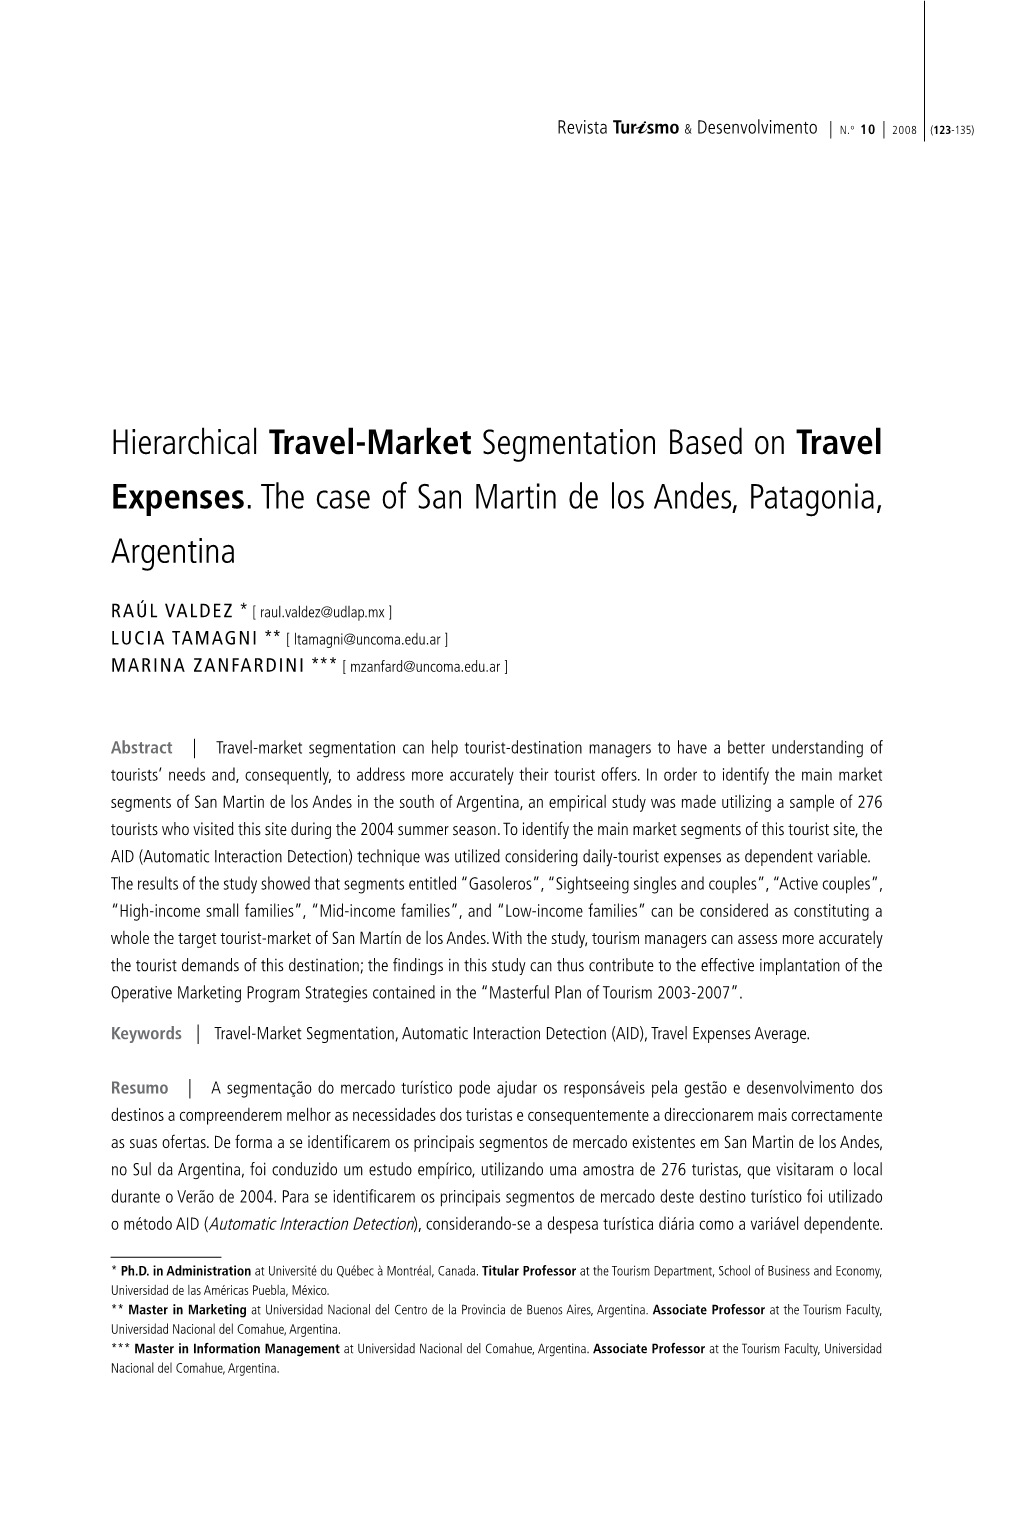 Hierarchical Travel-Market Segmentation Based on Travel Expenses. the Case of San Martin De Los Andes, Patagonia, Argentina